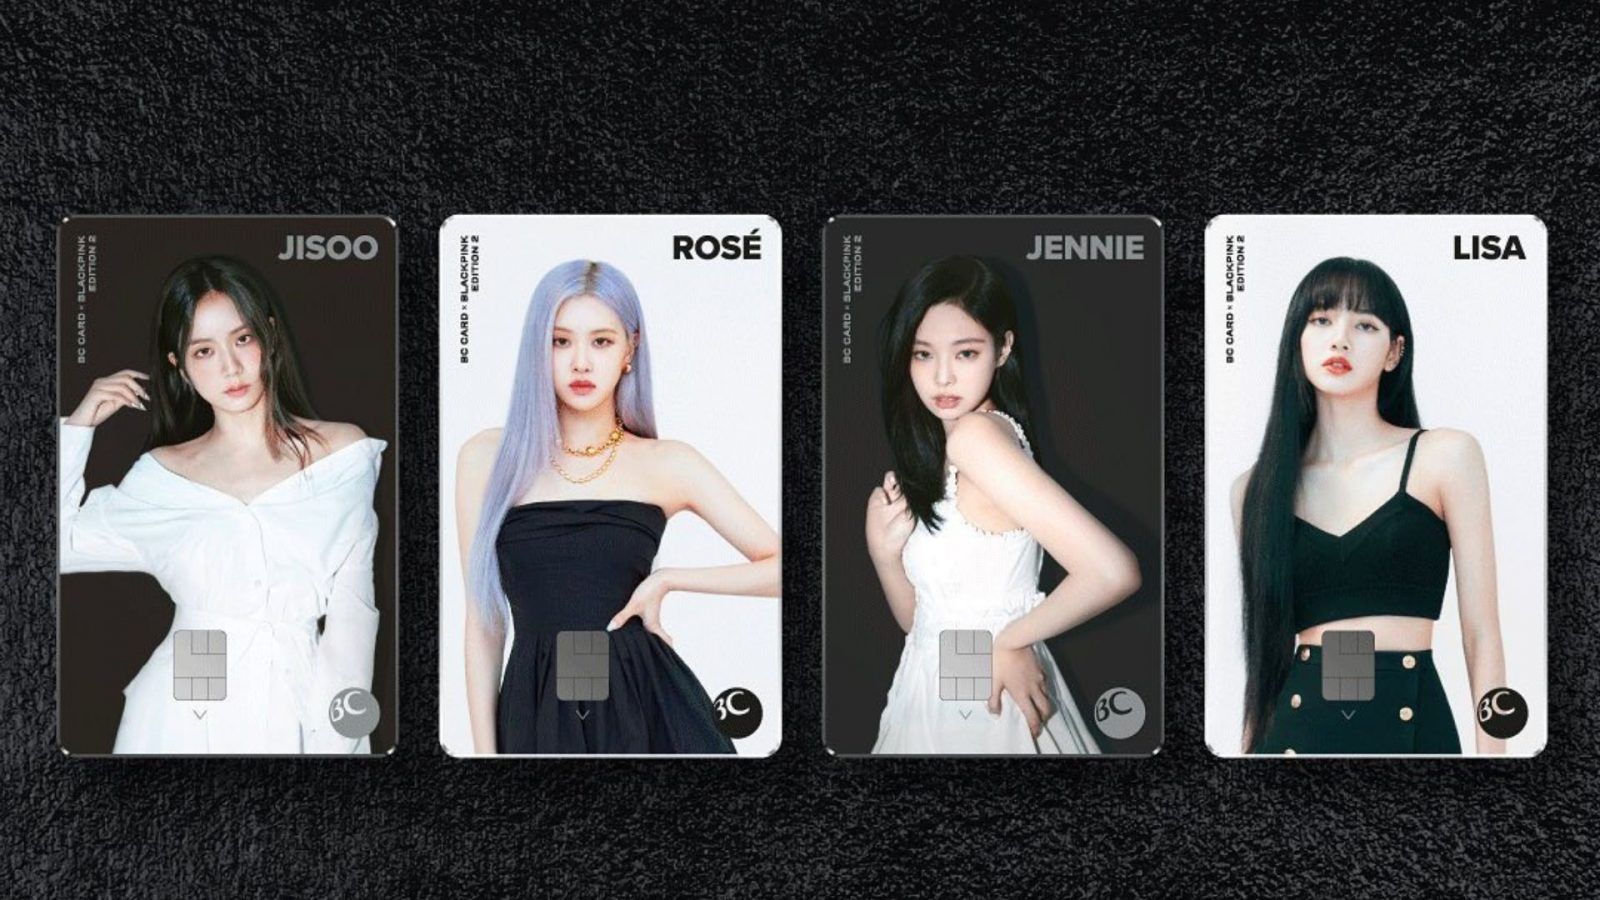 BLACKPINK to hold first-ever in-game virtual concert in ‘PUBG Mobile’